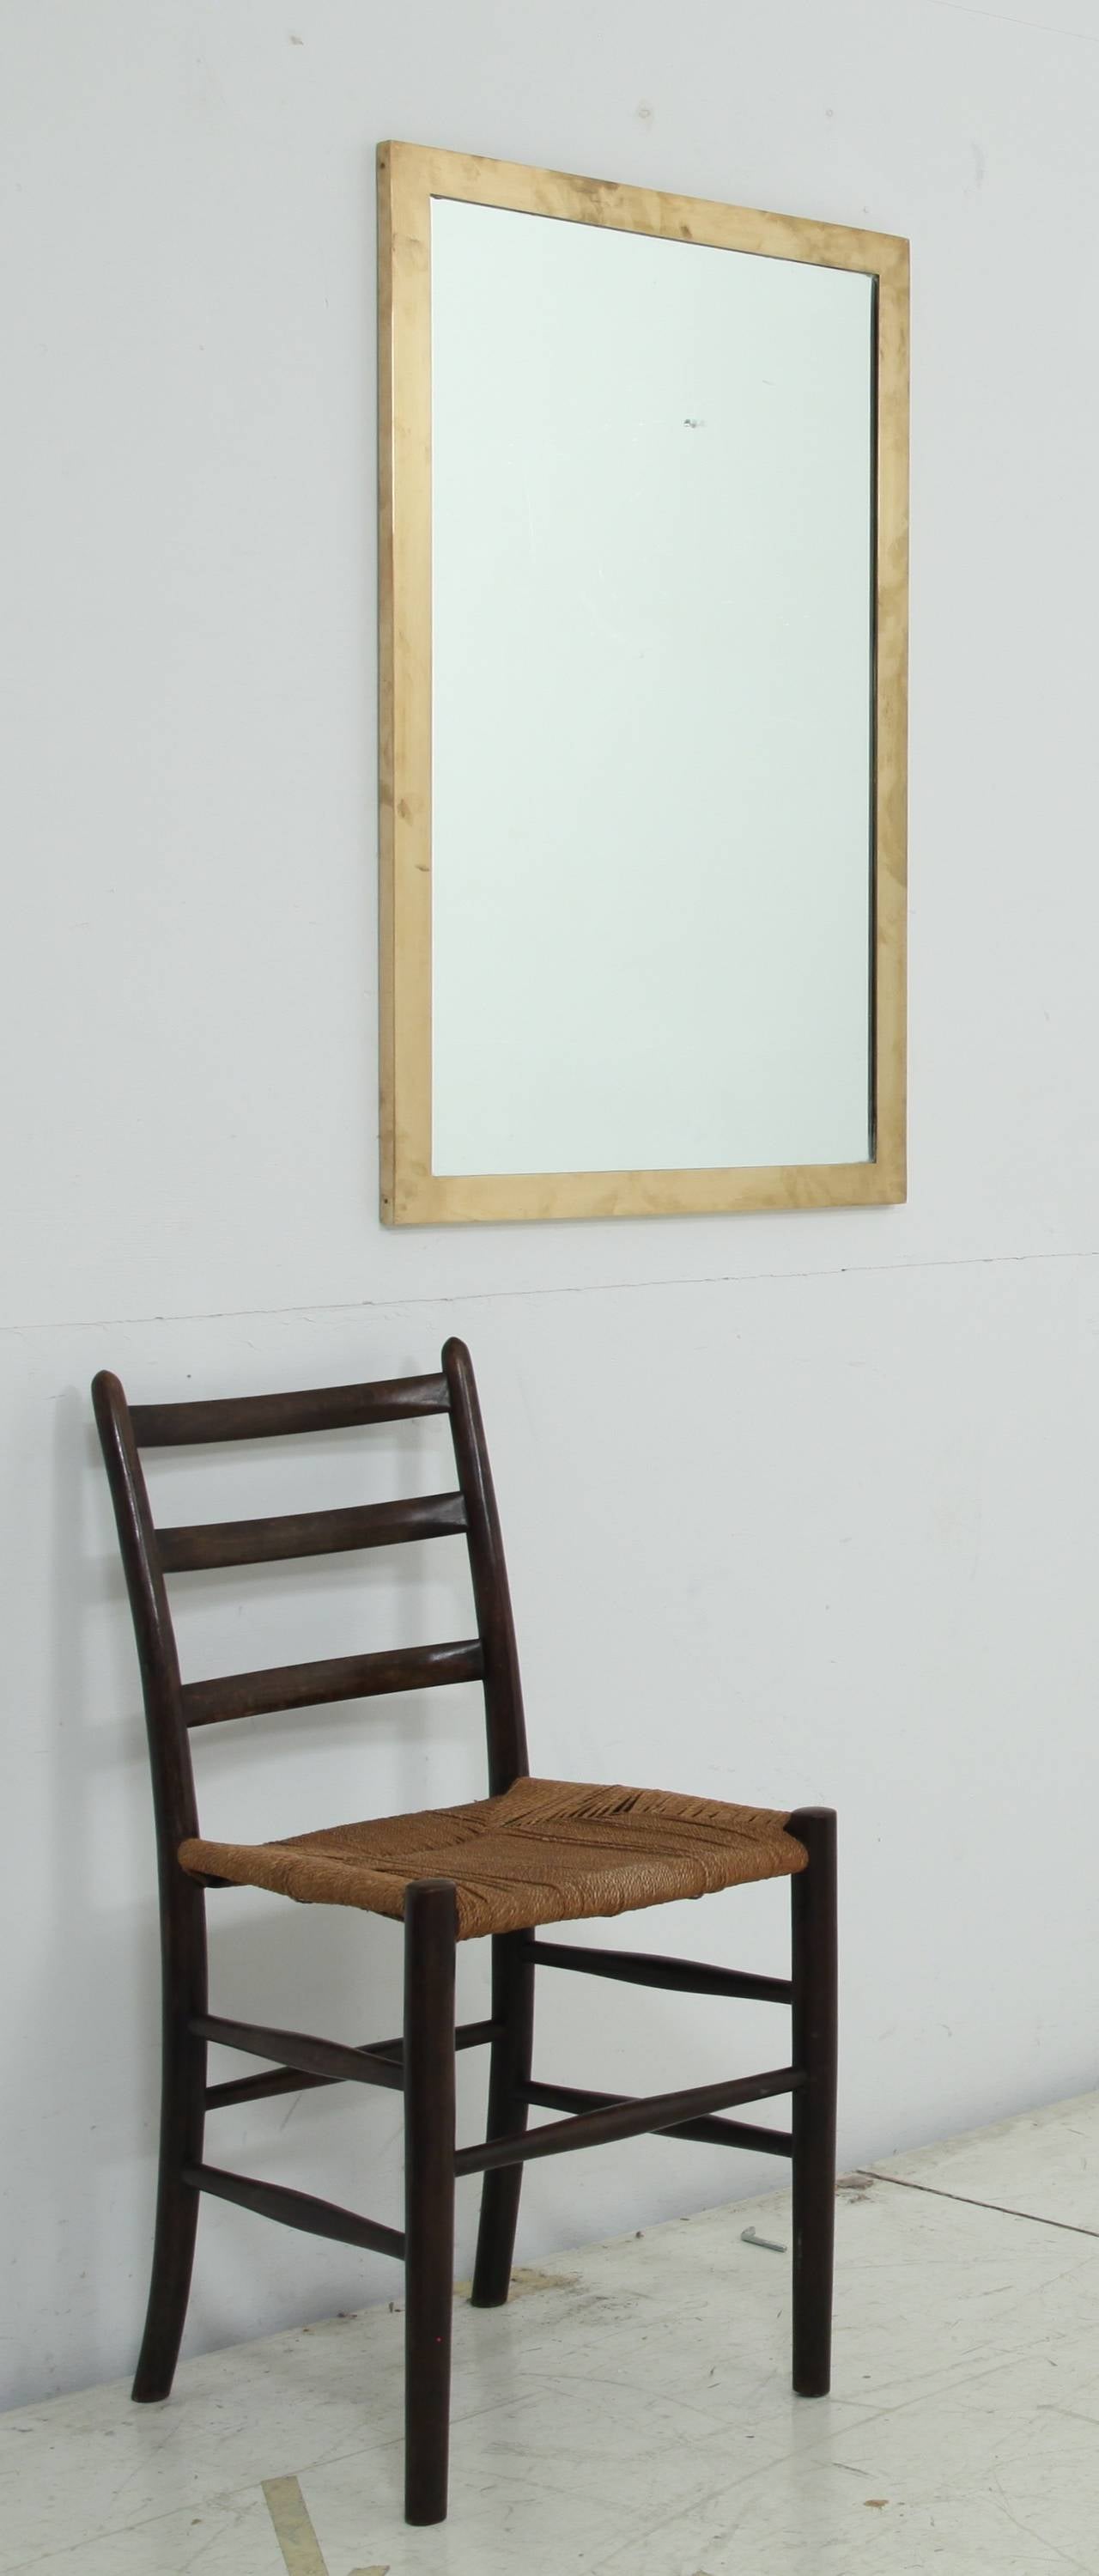 A rectangular wall mirror with a heavy brass frame on a wooden base.
Simple and elegant